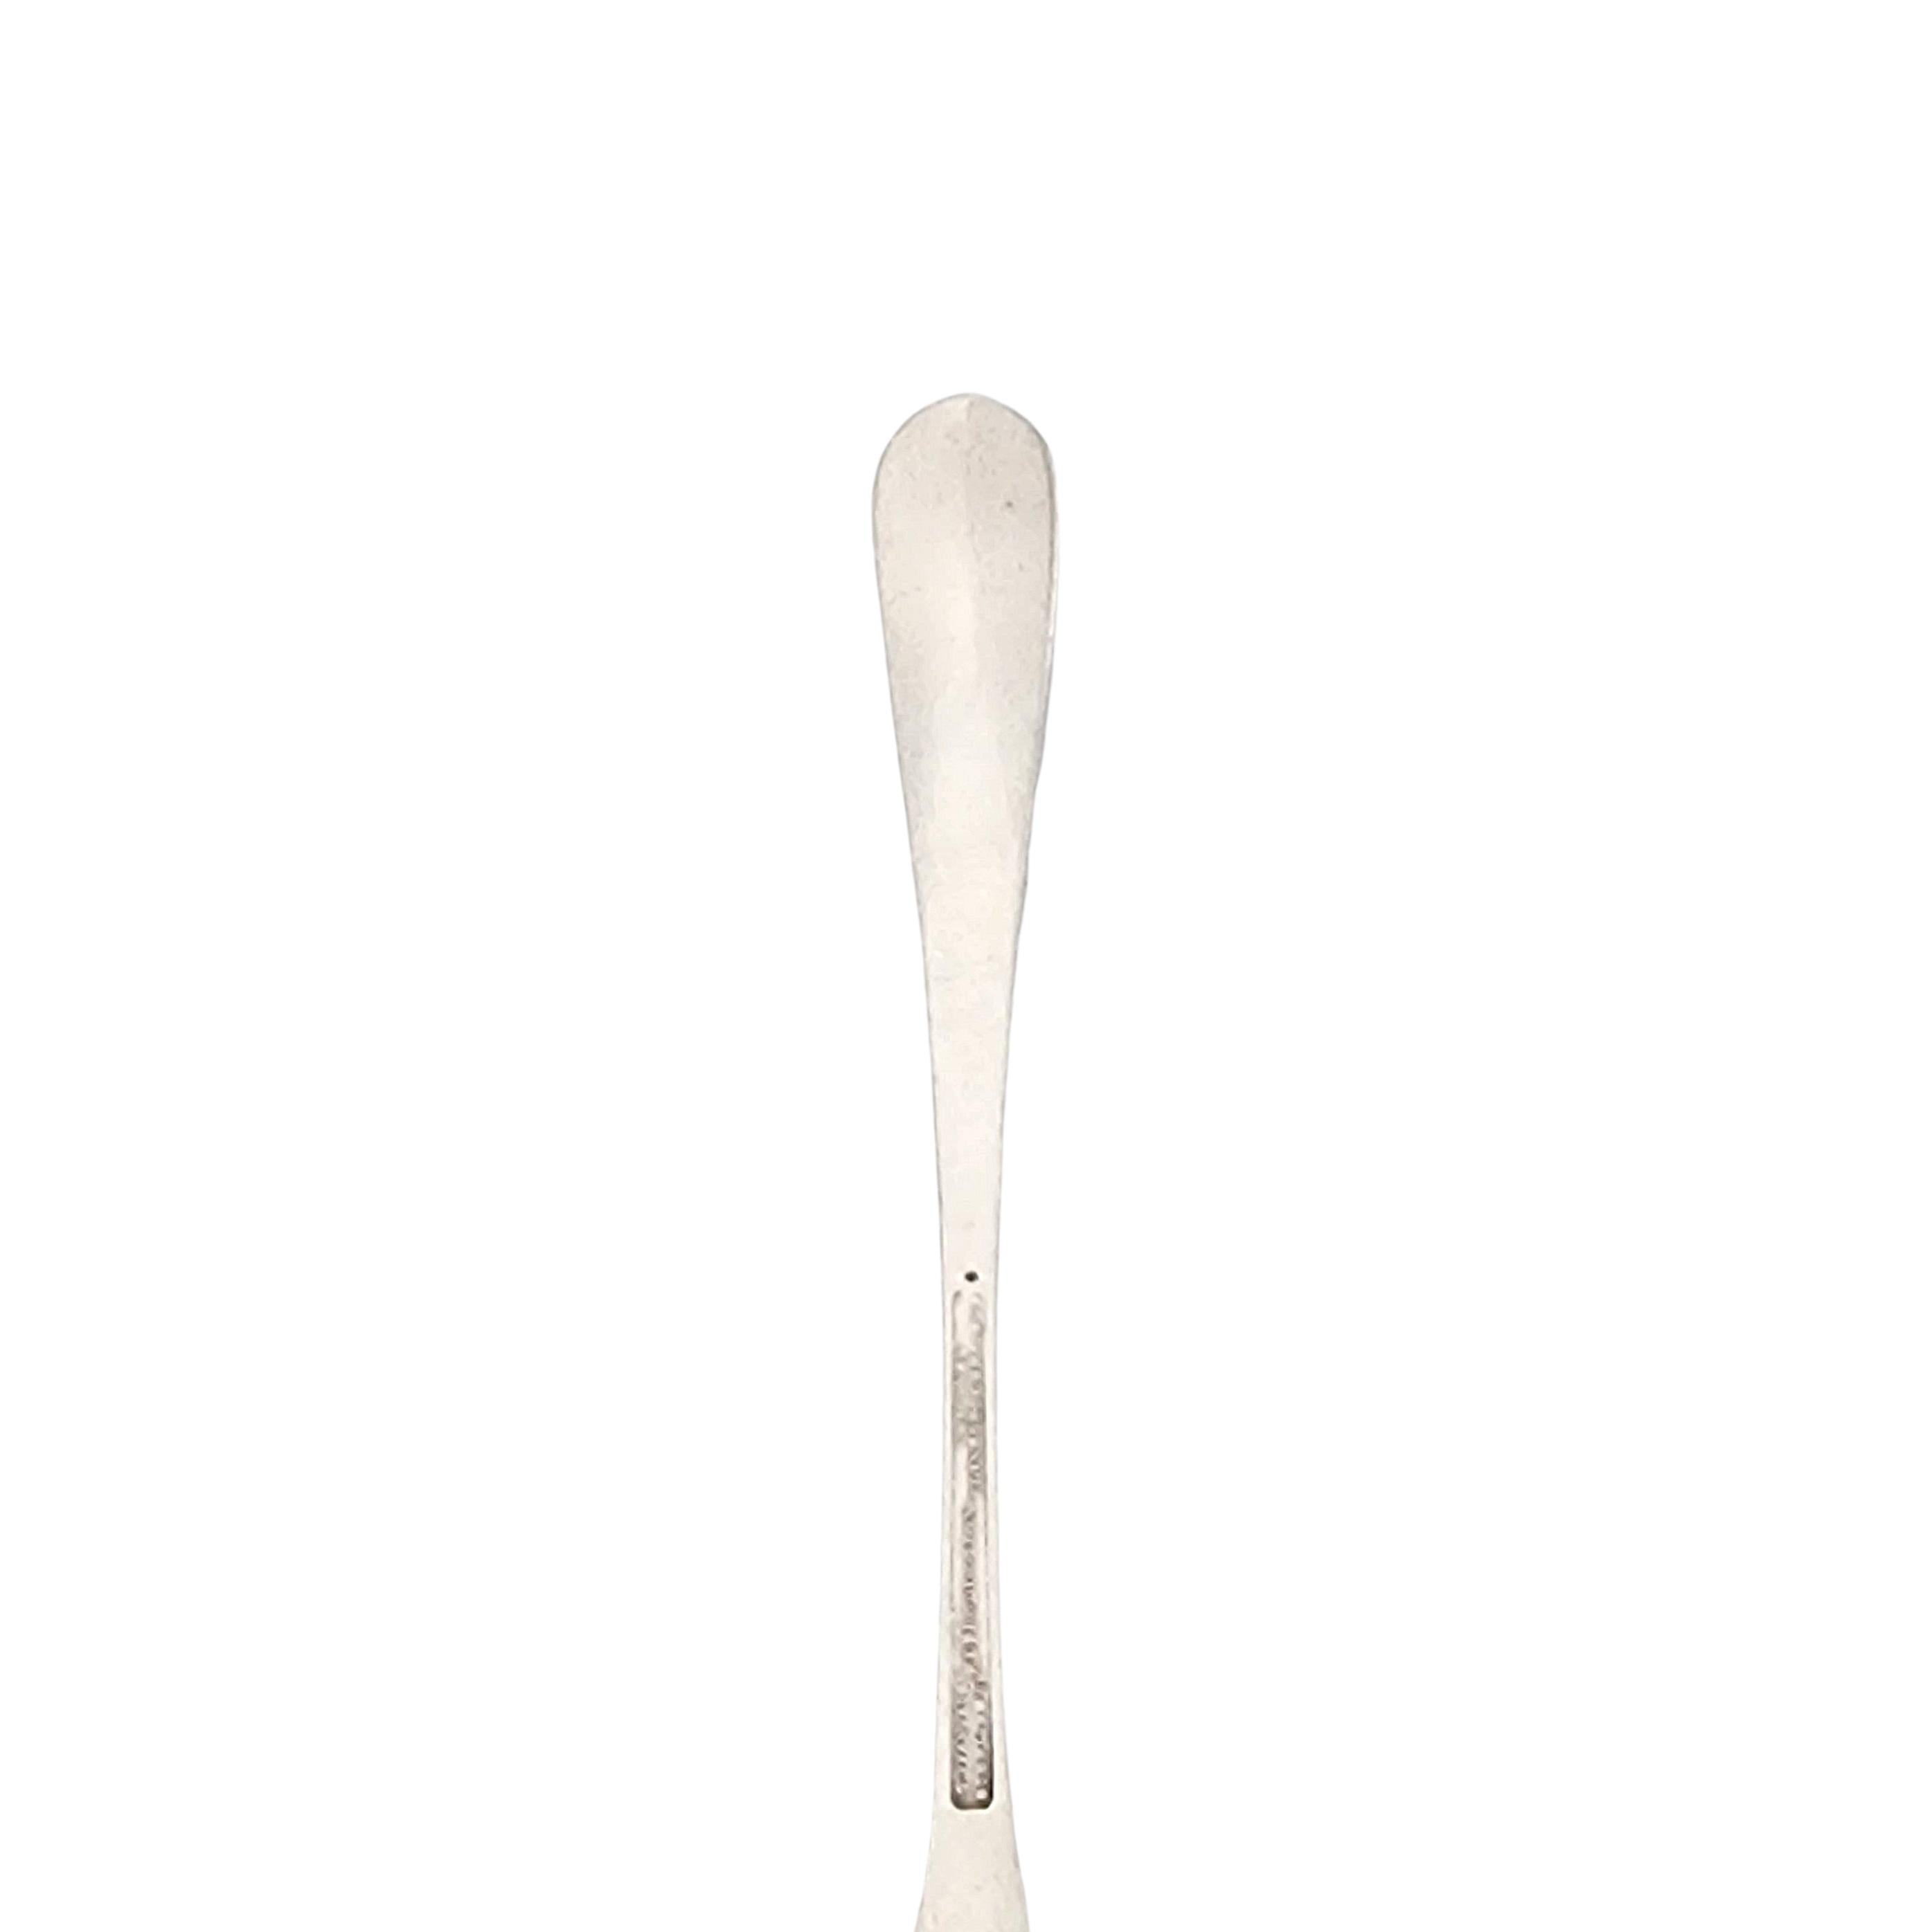 Sterling silver reproduction Edinborough ladle with monogram by Tiffany & Co.

Monogram appears to be H

This small ladle features a simple and classic rounded handle design. Does not include Tiffany & Co box or pouch. The M mark on this spoon dates